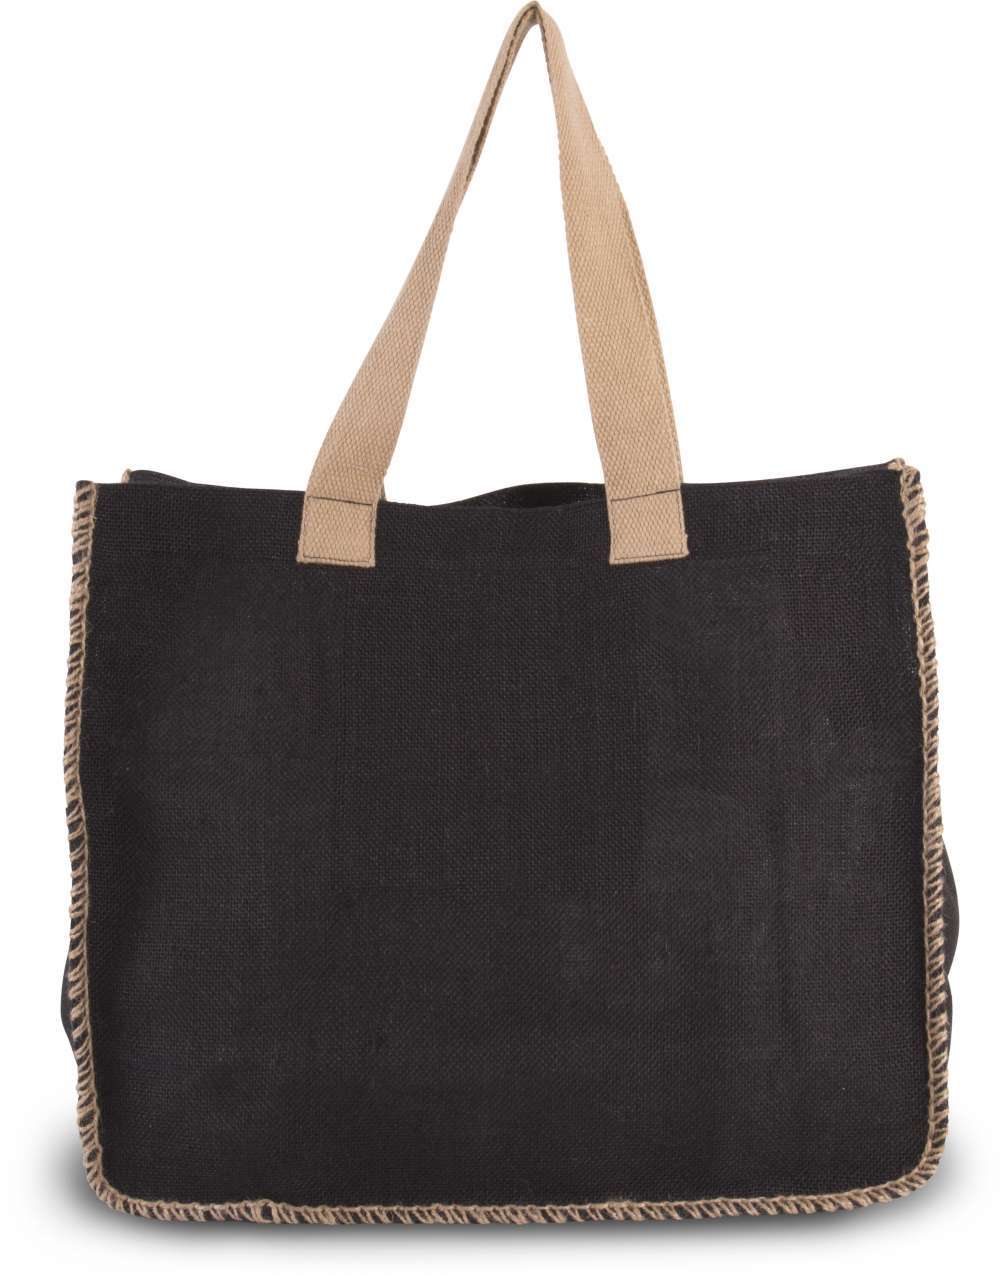 JUTE BAG WITH CONTRAST STITCHING - MERCHYOU